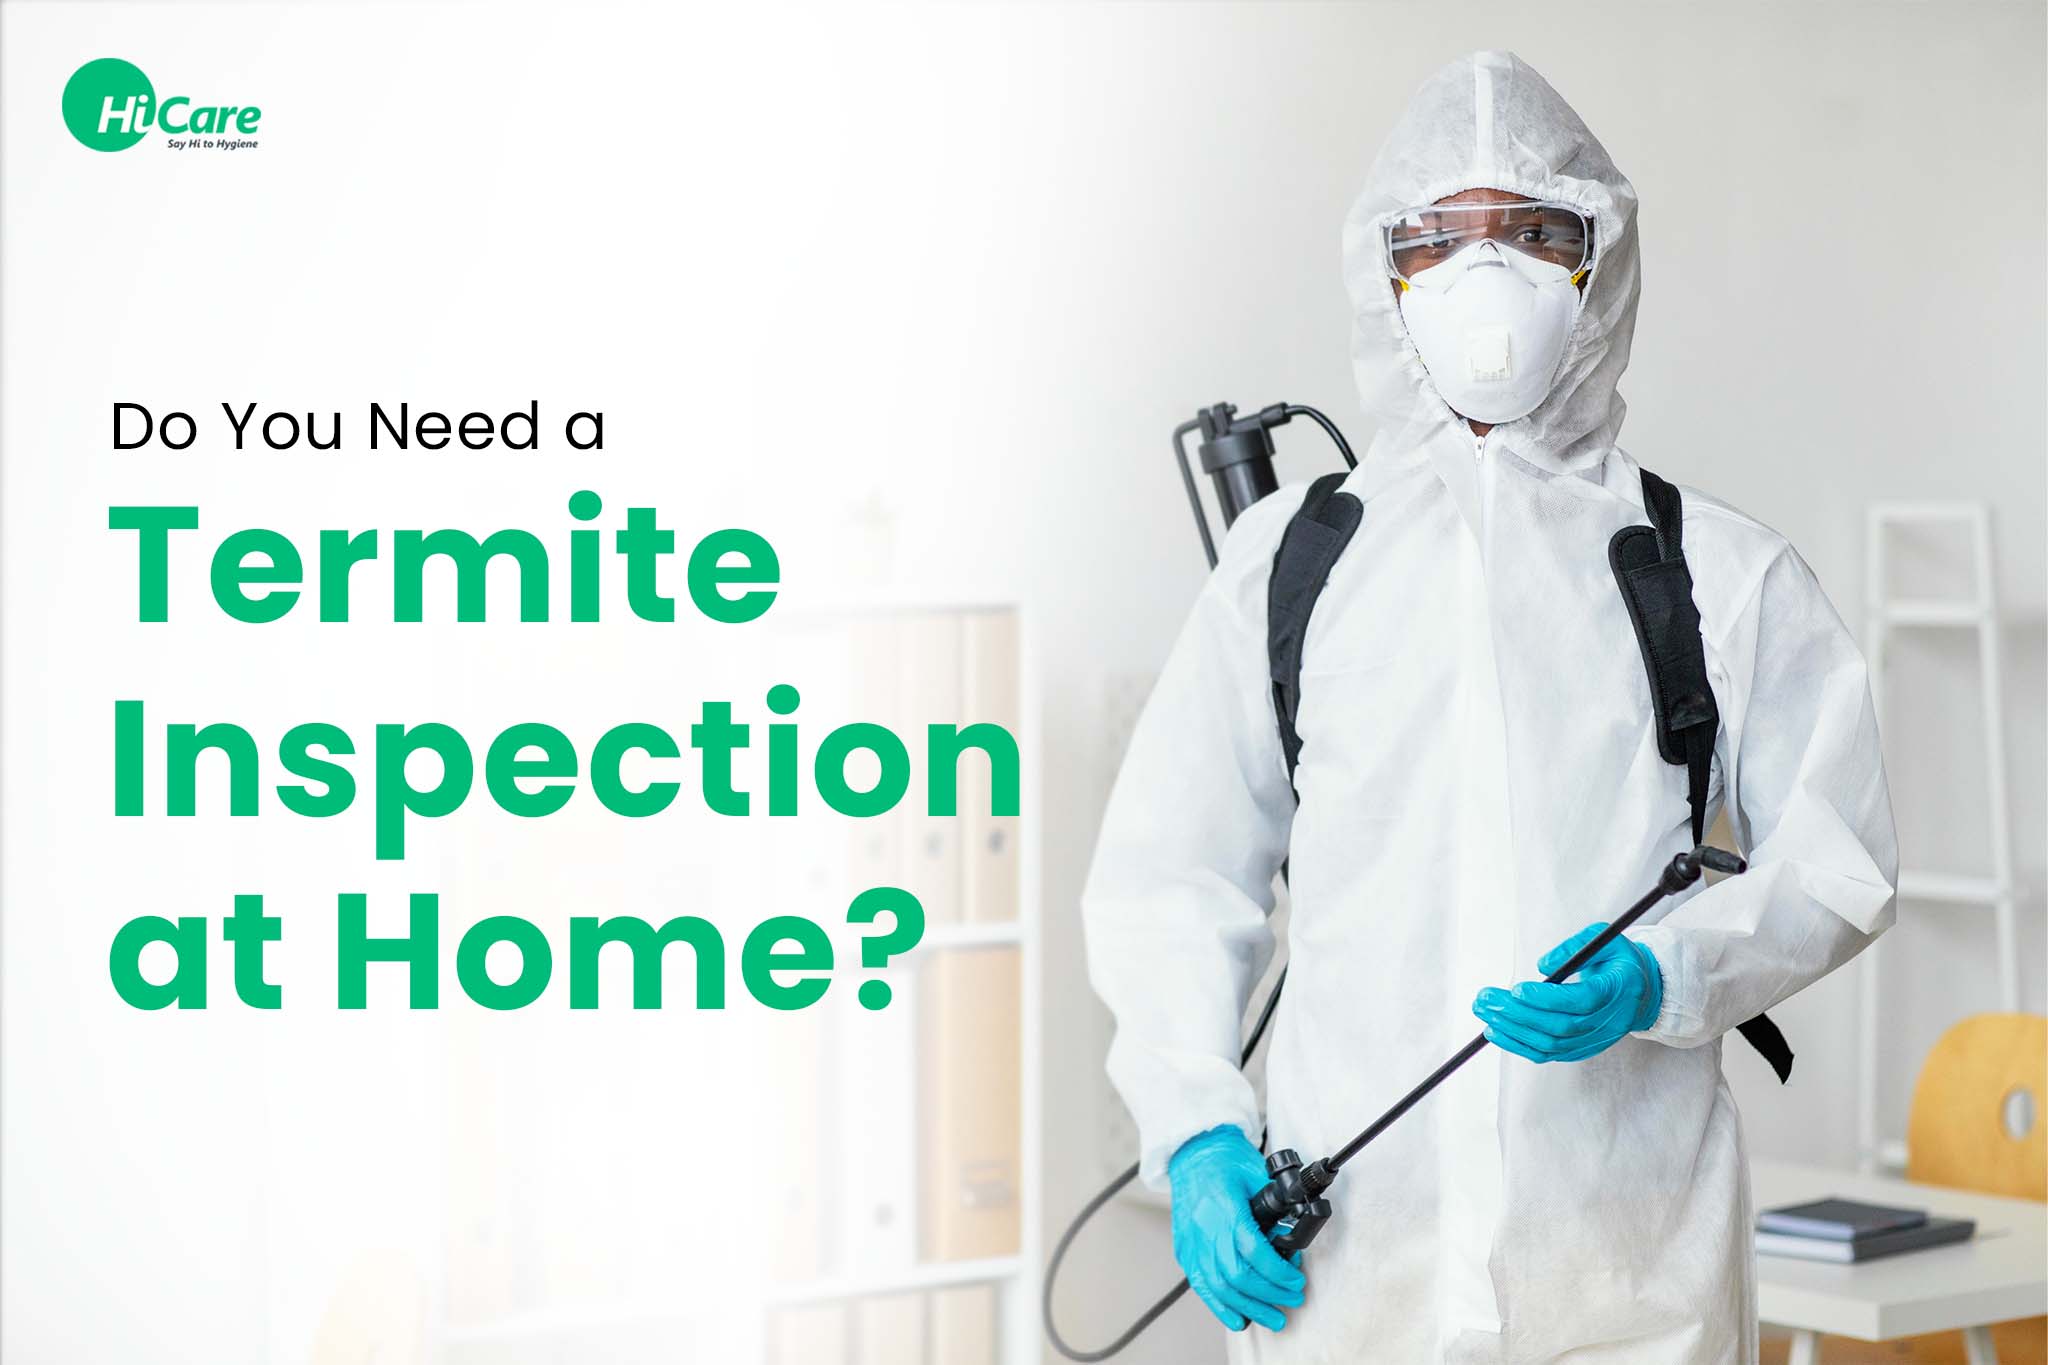 Do You Need a Termite Inspection at Home?